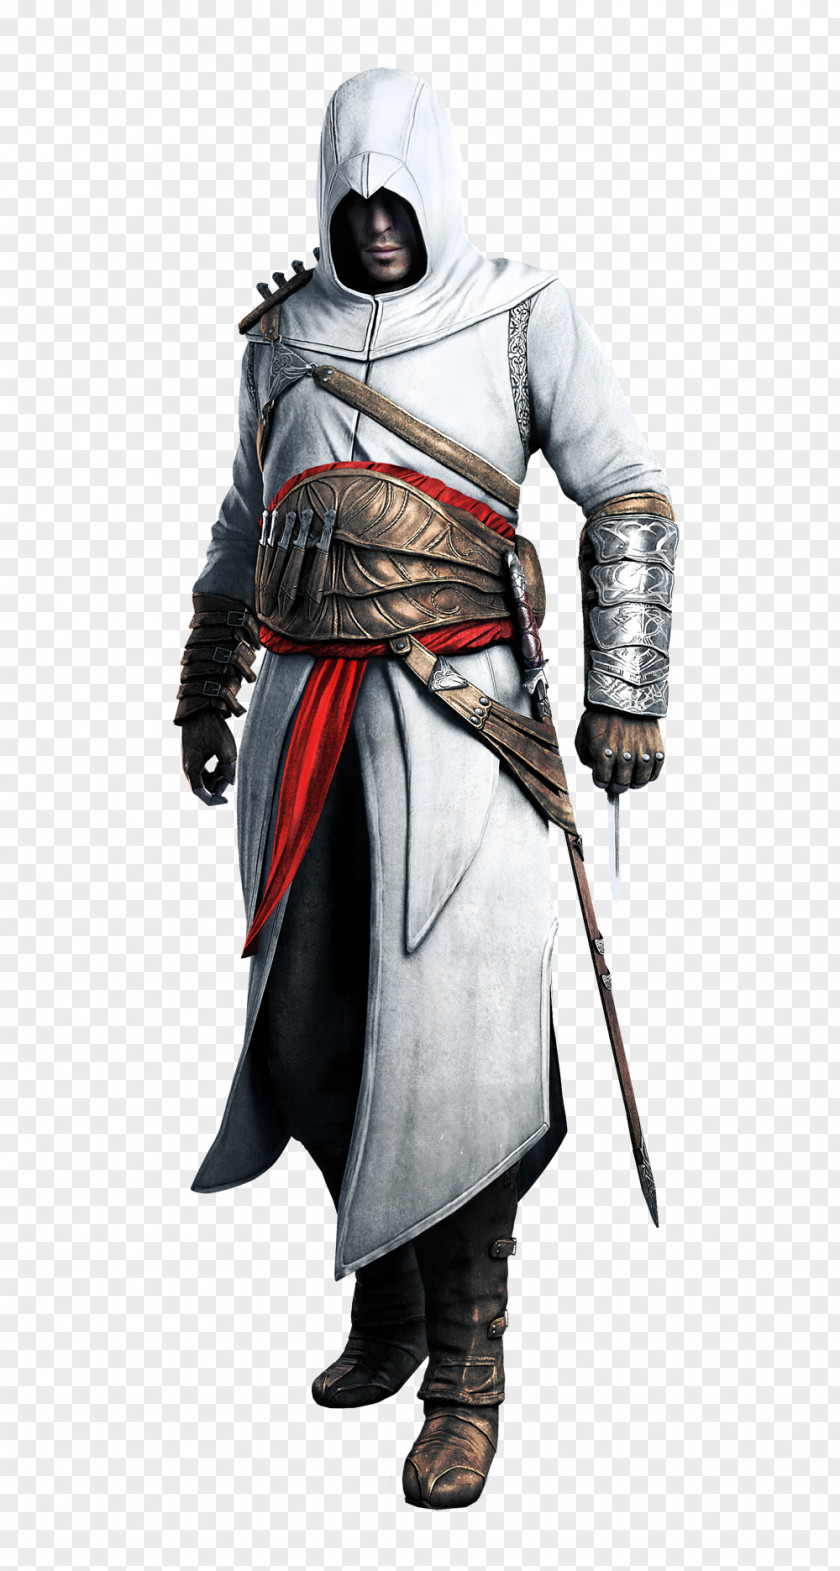 Altair Assassins Creed Clipart Creed: Altaxefrs Chronicles Revelations III PNG